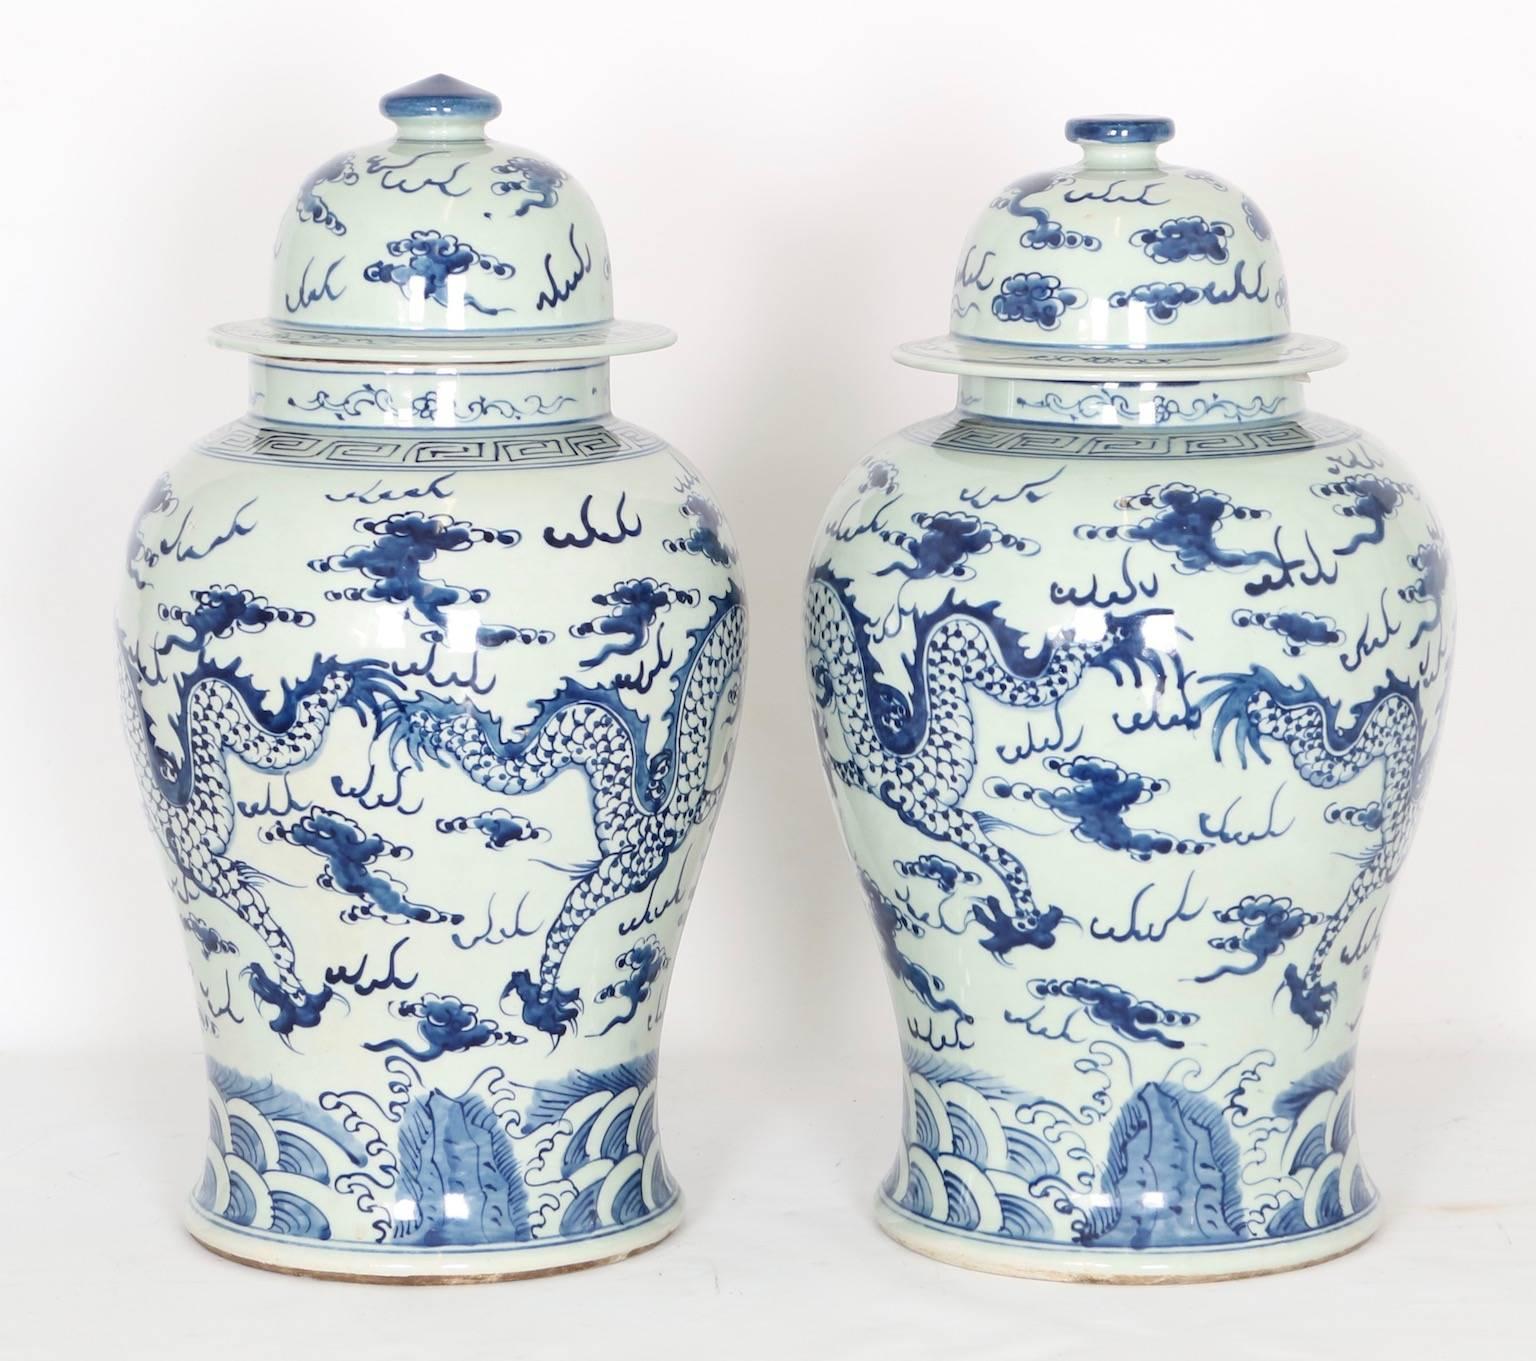 Porcelain Chinese Export Ginger Jars in Blue and White